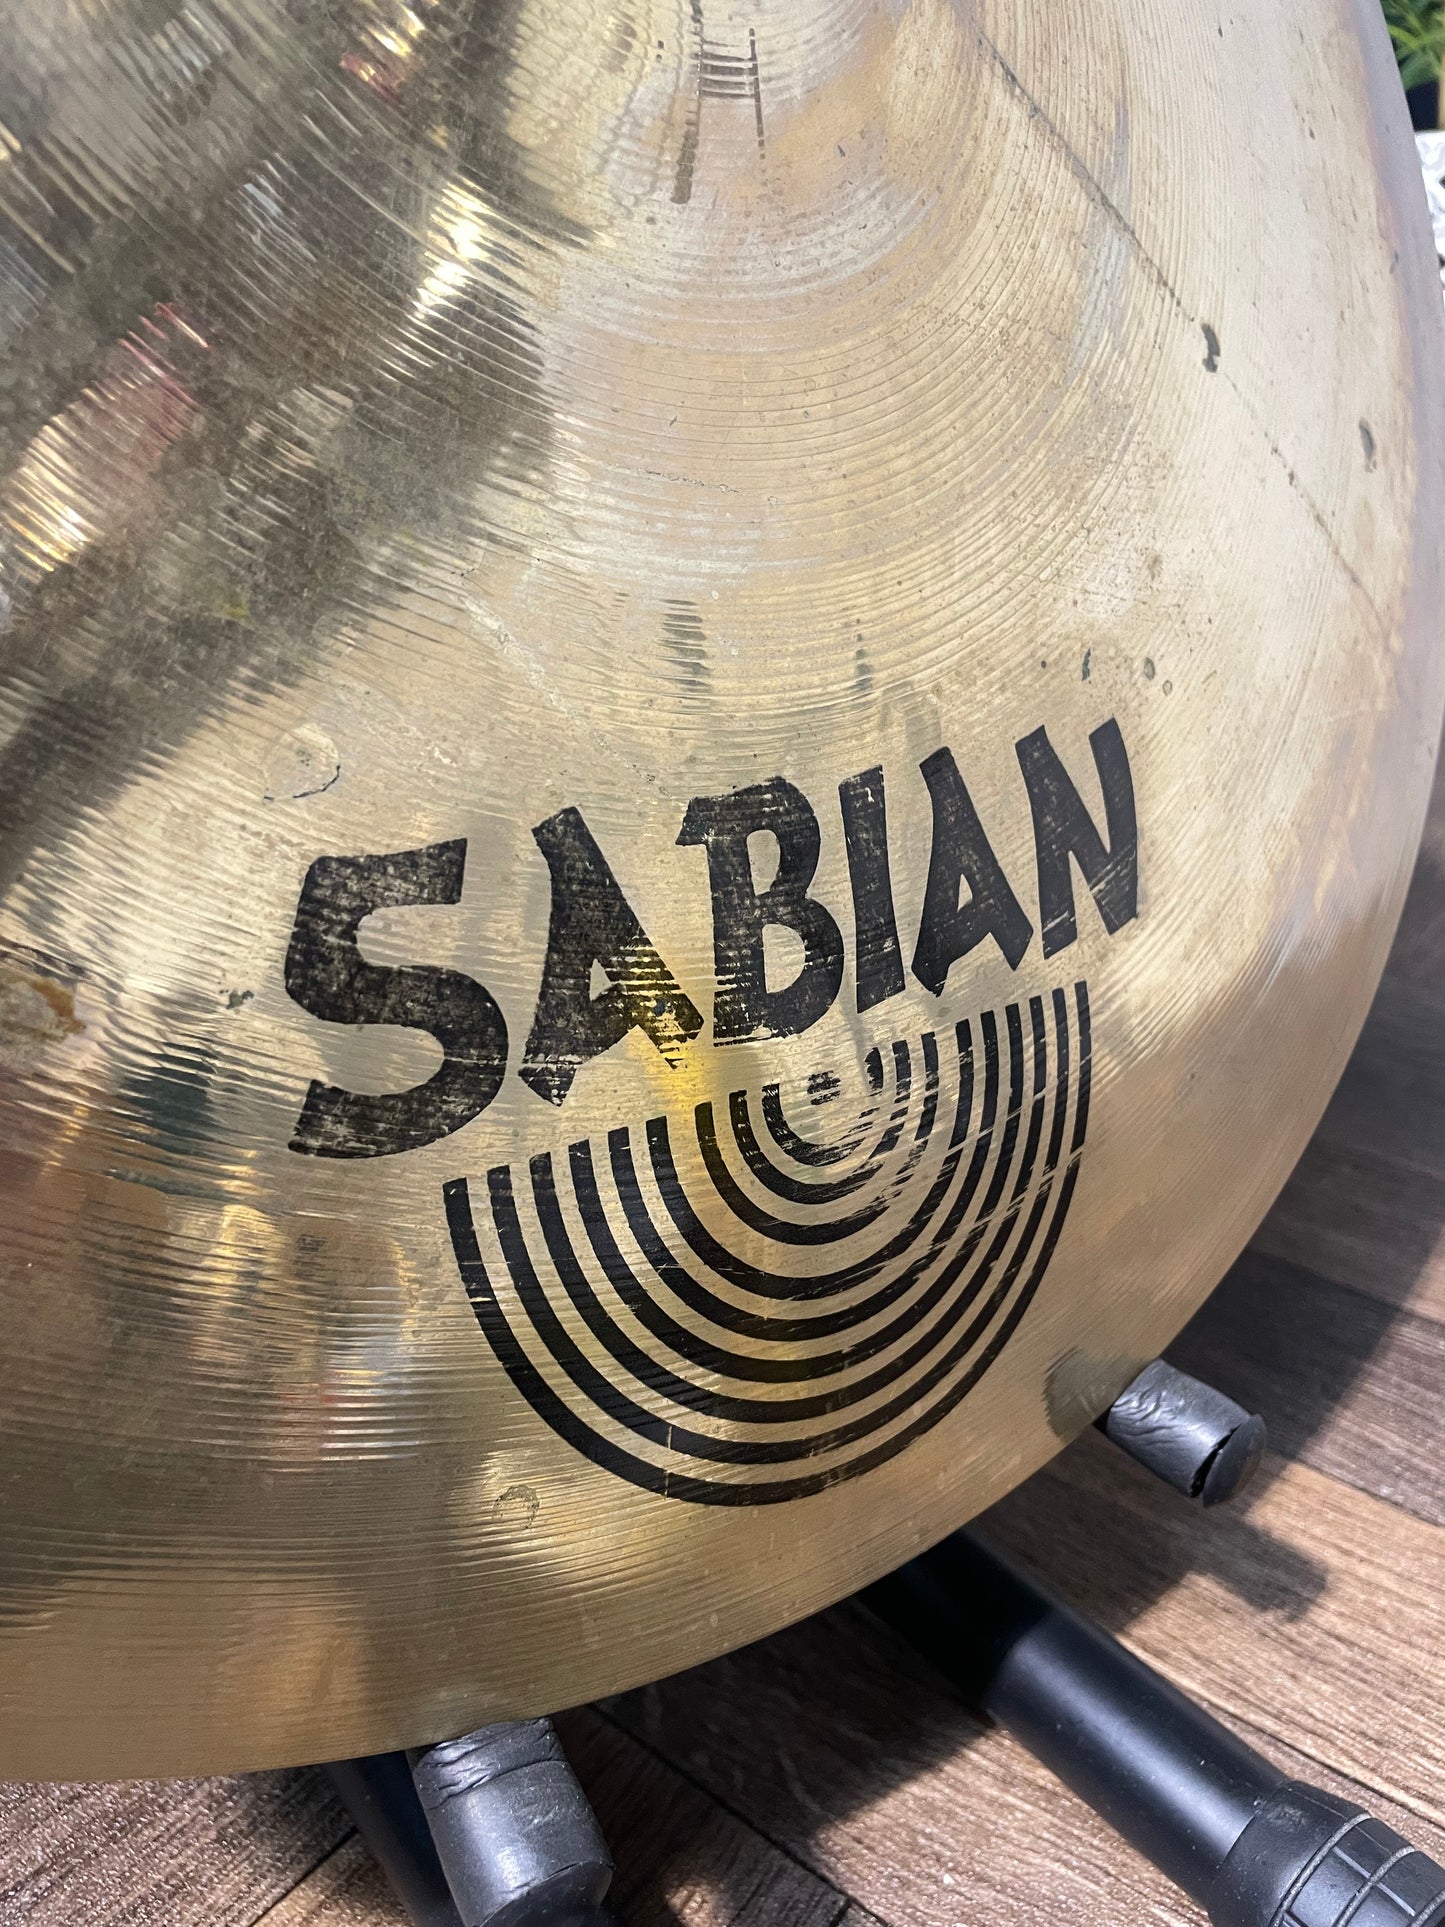 Sabian AAX Stage Ride 20”/51cm Ride Cymbal #LH10